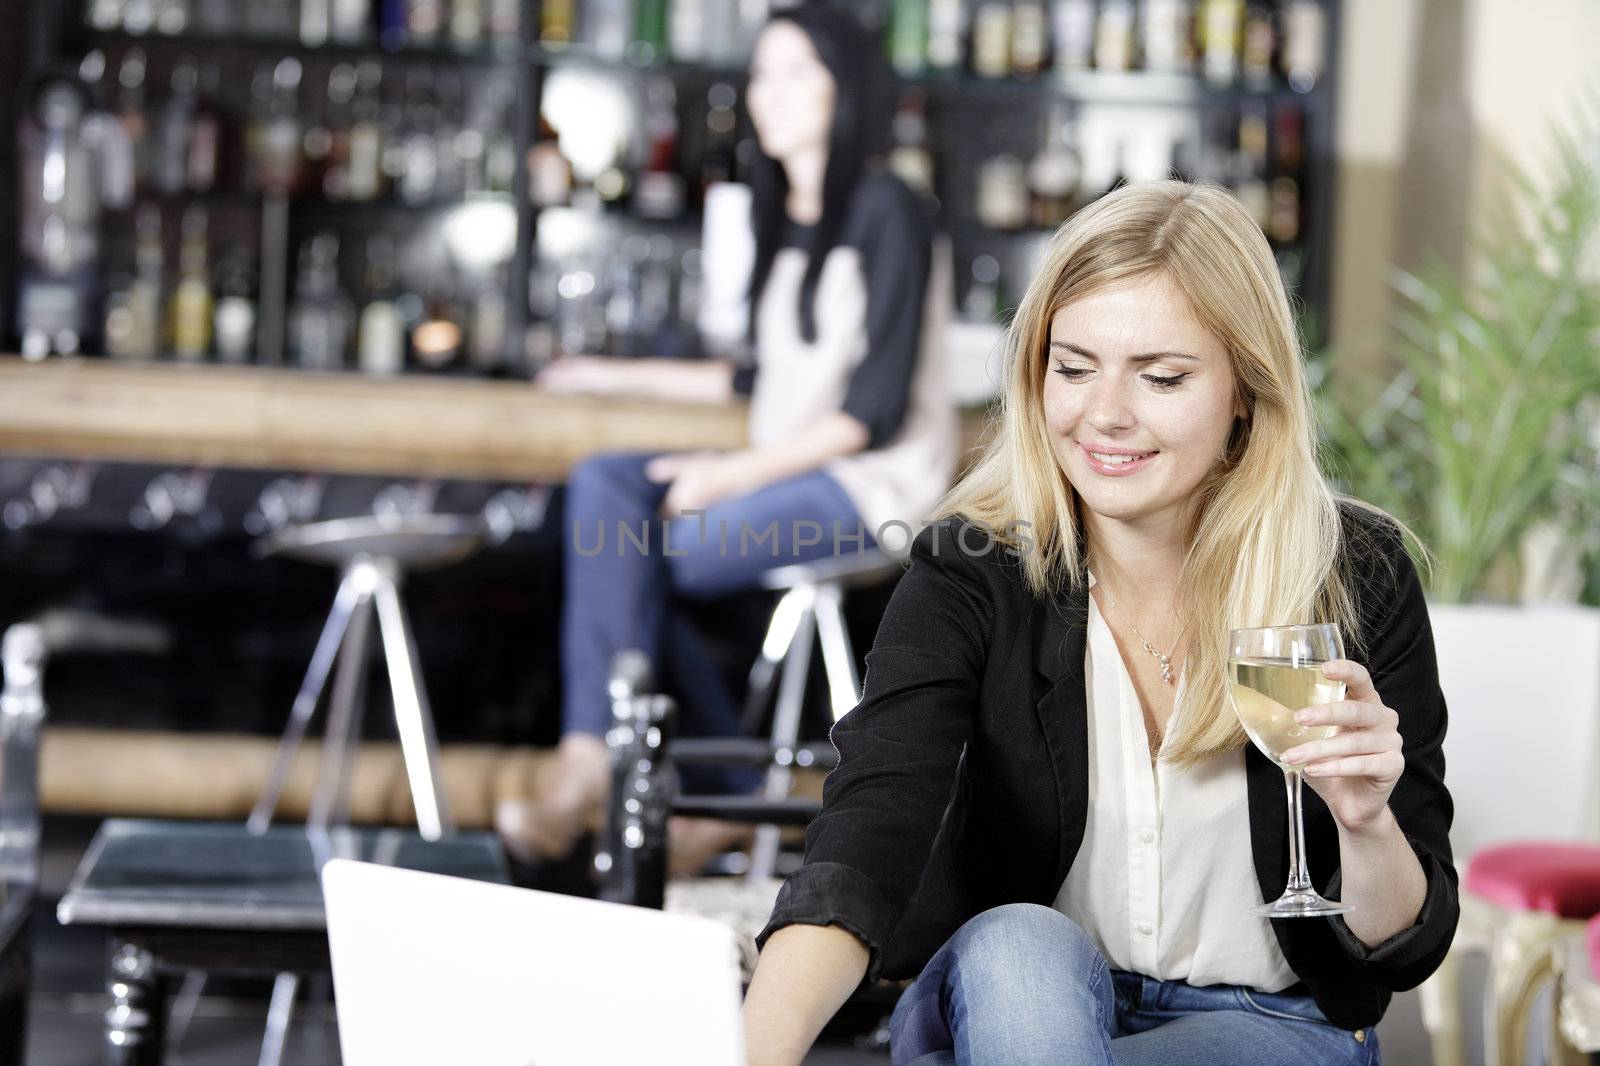 Beautiful young woman chatting with friends on her laptop while enjoying a glass of wine in a bar